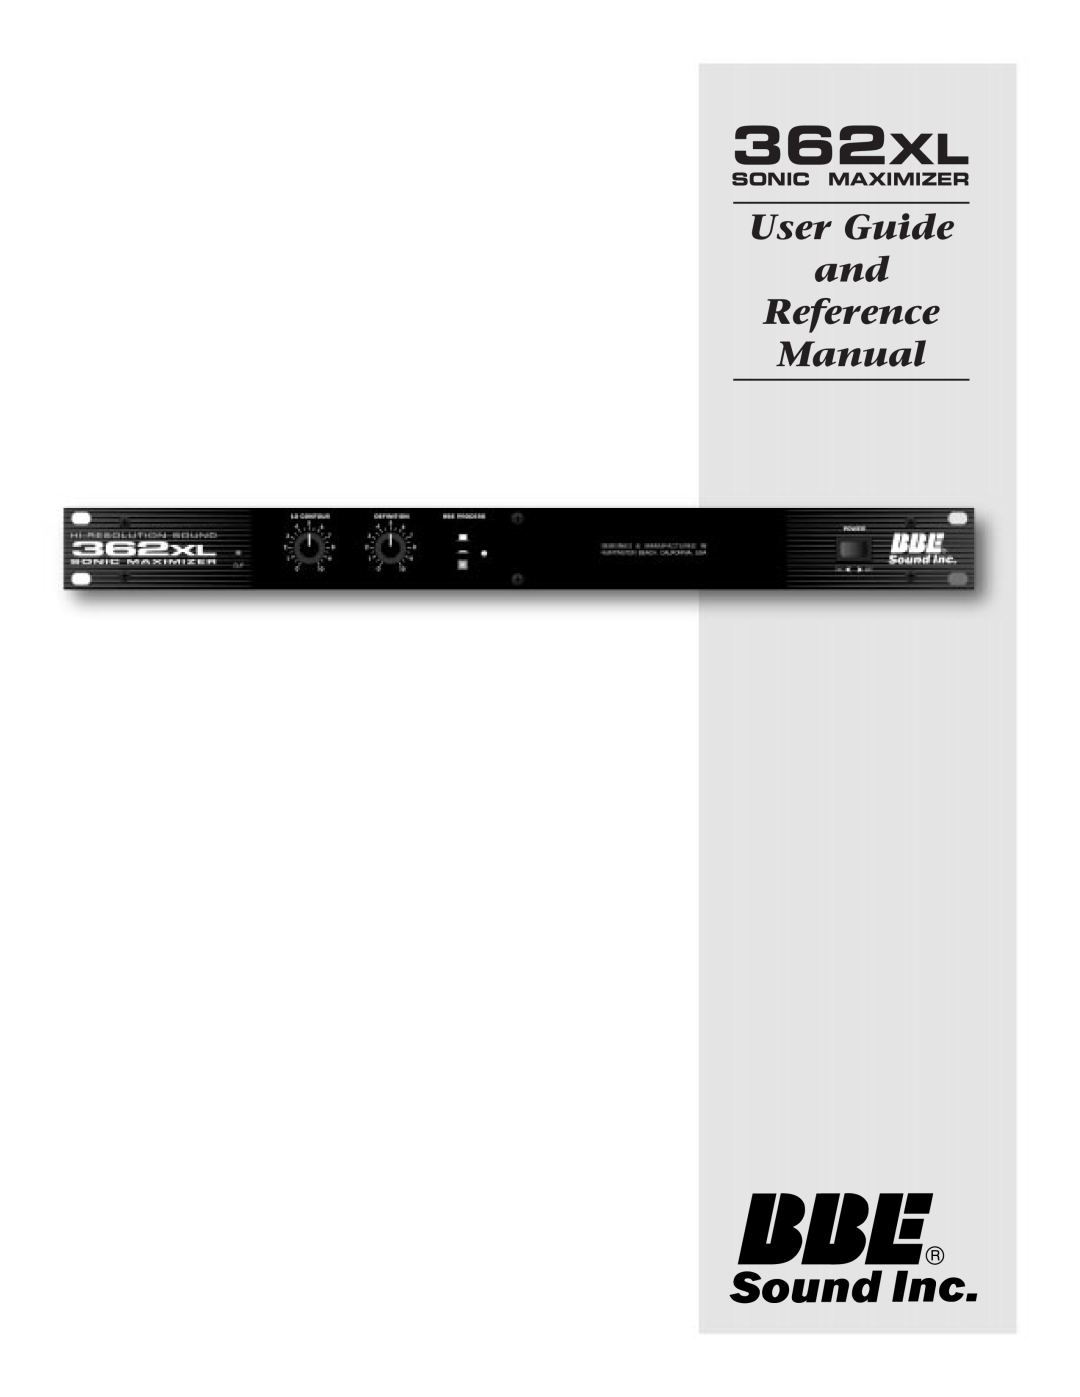 BBE 362XL manual User Guide and Reference Manual, Sonic Maximizer 